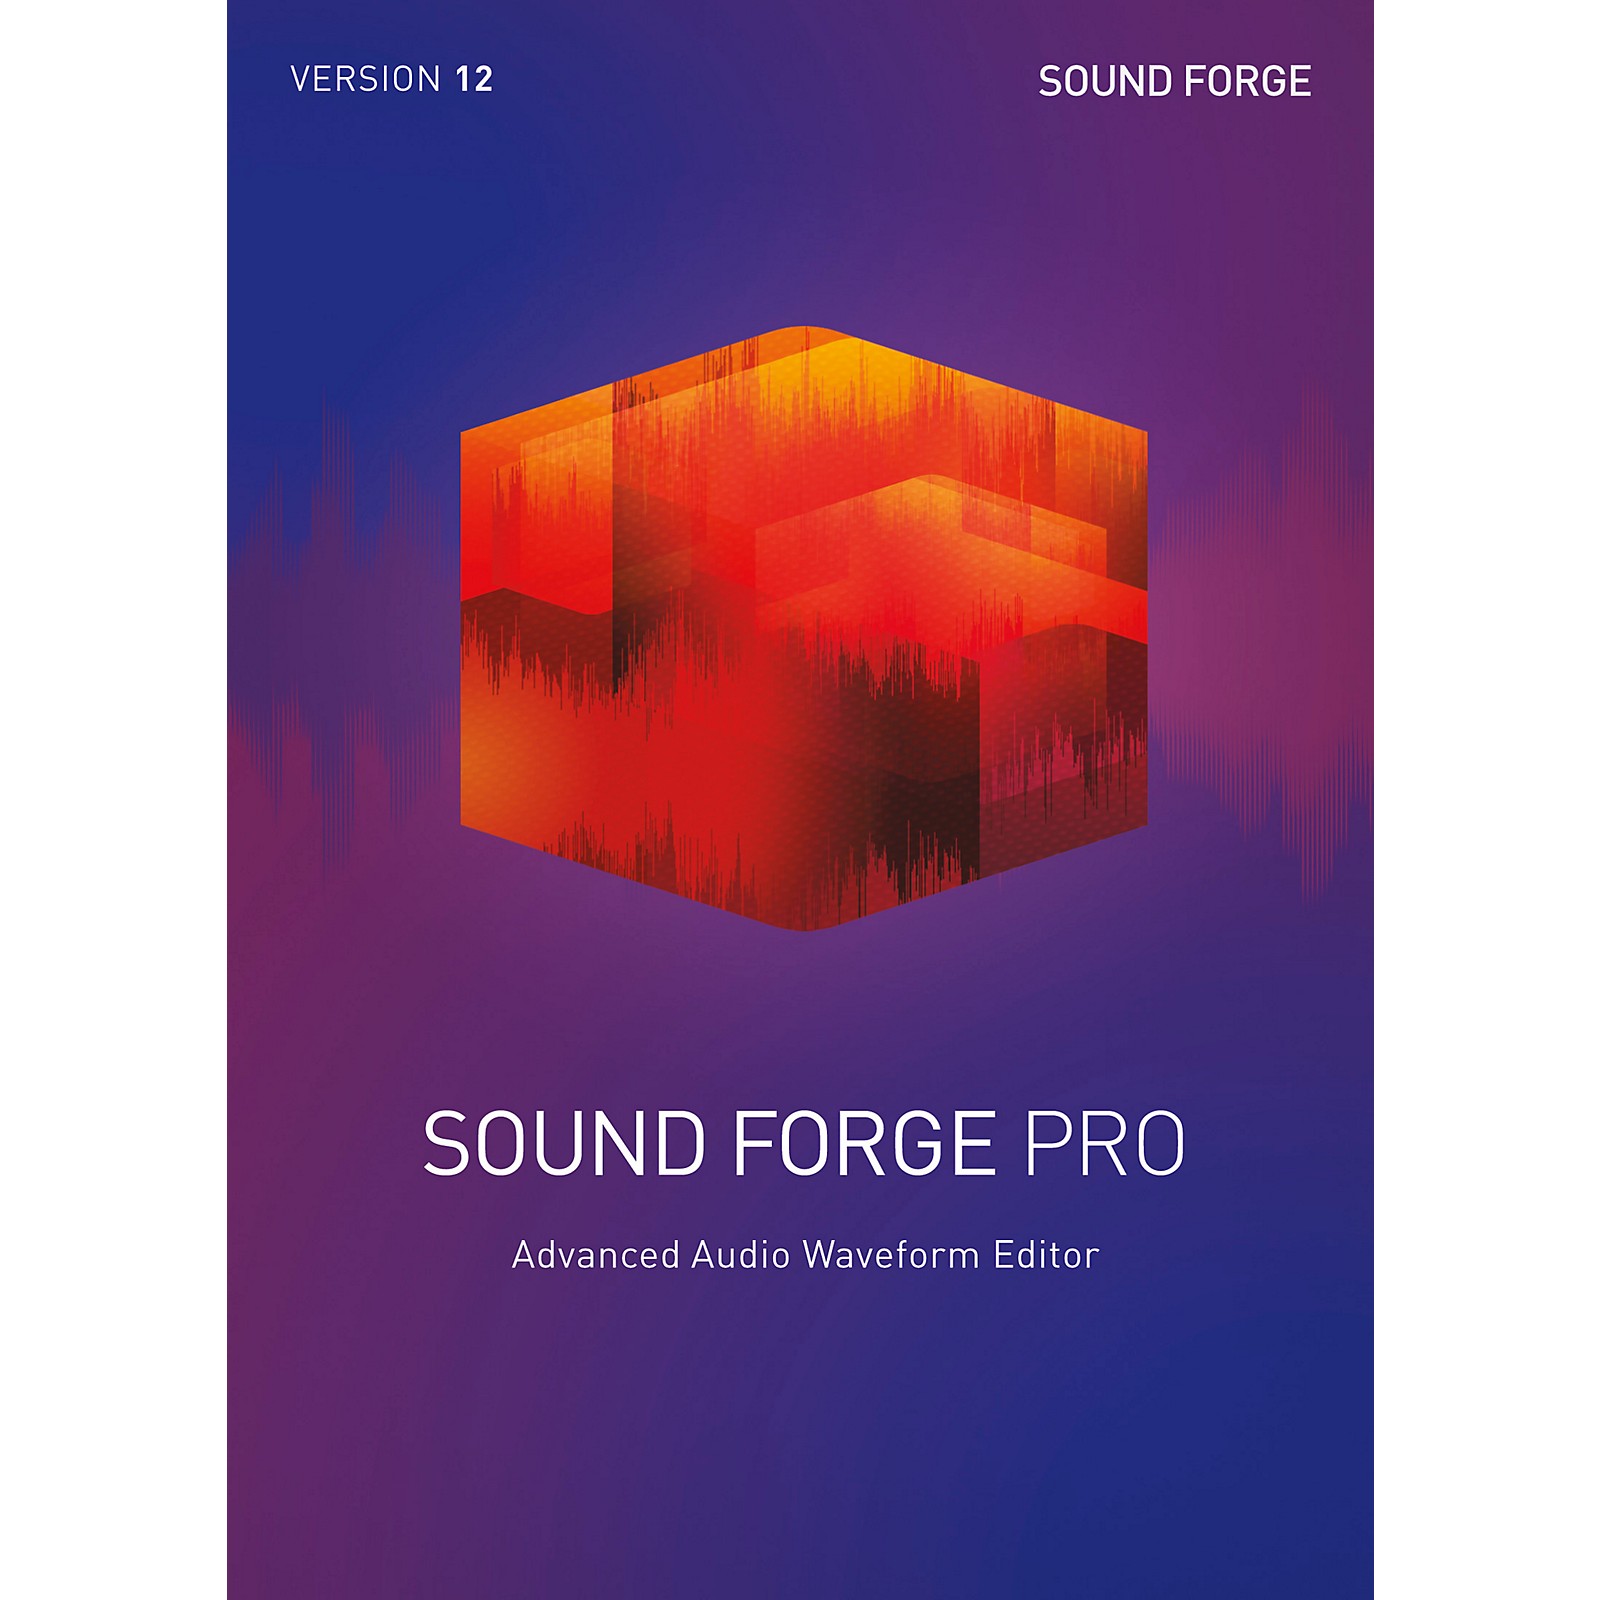 sound forge pro 12 manual